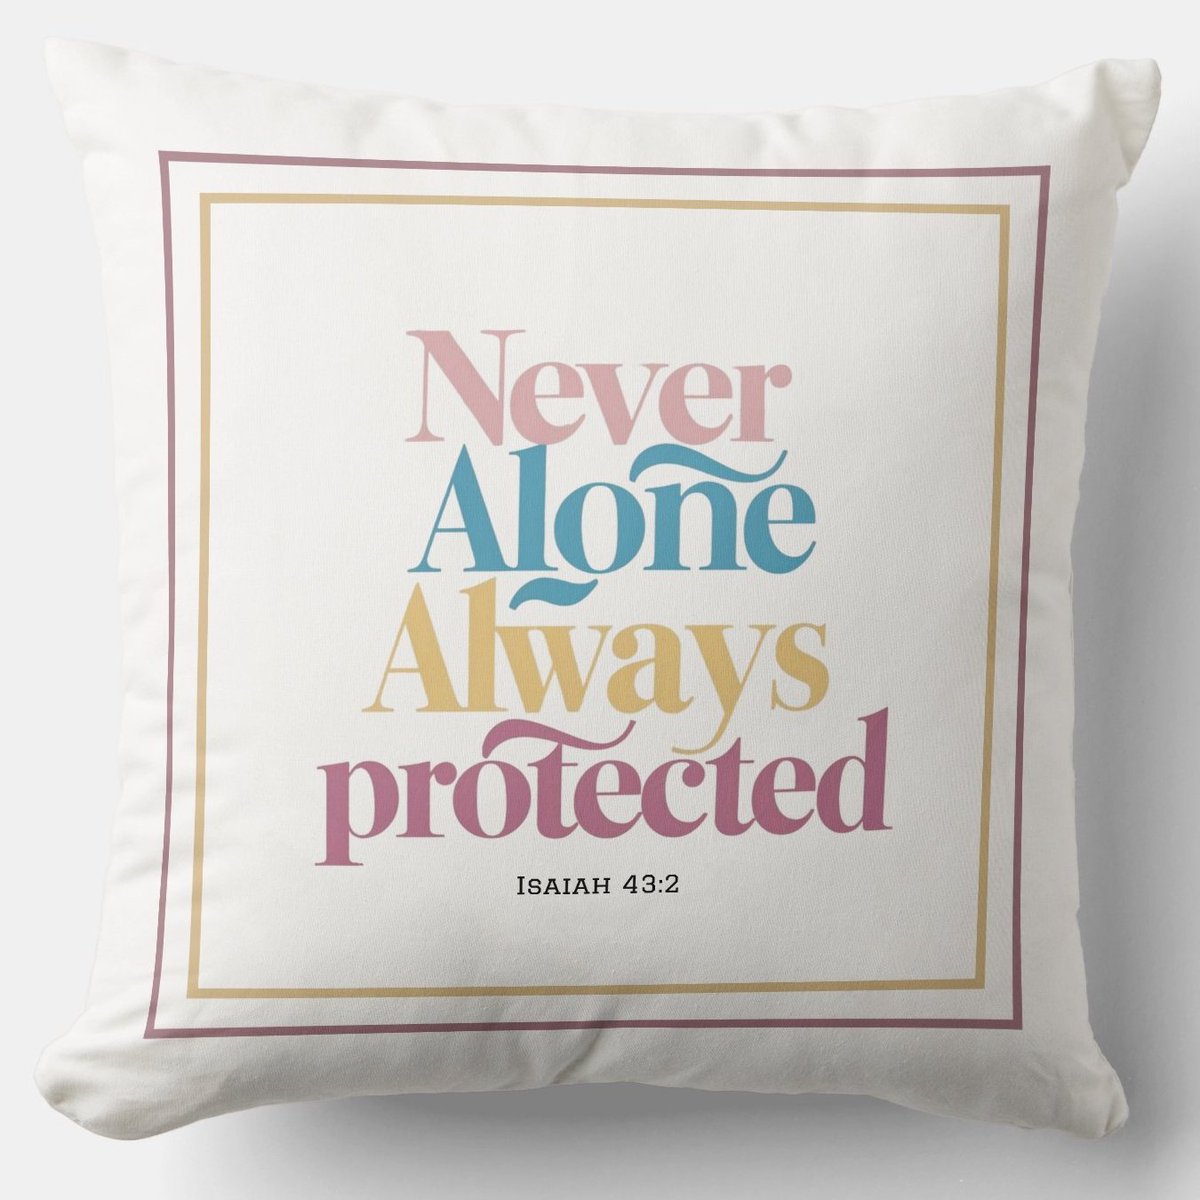 Never Alone, Always Protected #Cushion zazzle.com/never_alone_al… #Pillow #Blessing #JesusChrist #JesusSaves #Jesus #christian #spiritual #Homedecoration #uniquegift #giftideas #giftforhim #giftidea #HolySpirit #pillows #giftshop #giftsforher #giftsforfriend #faith #hope #bibleverse